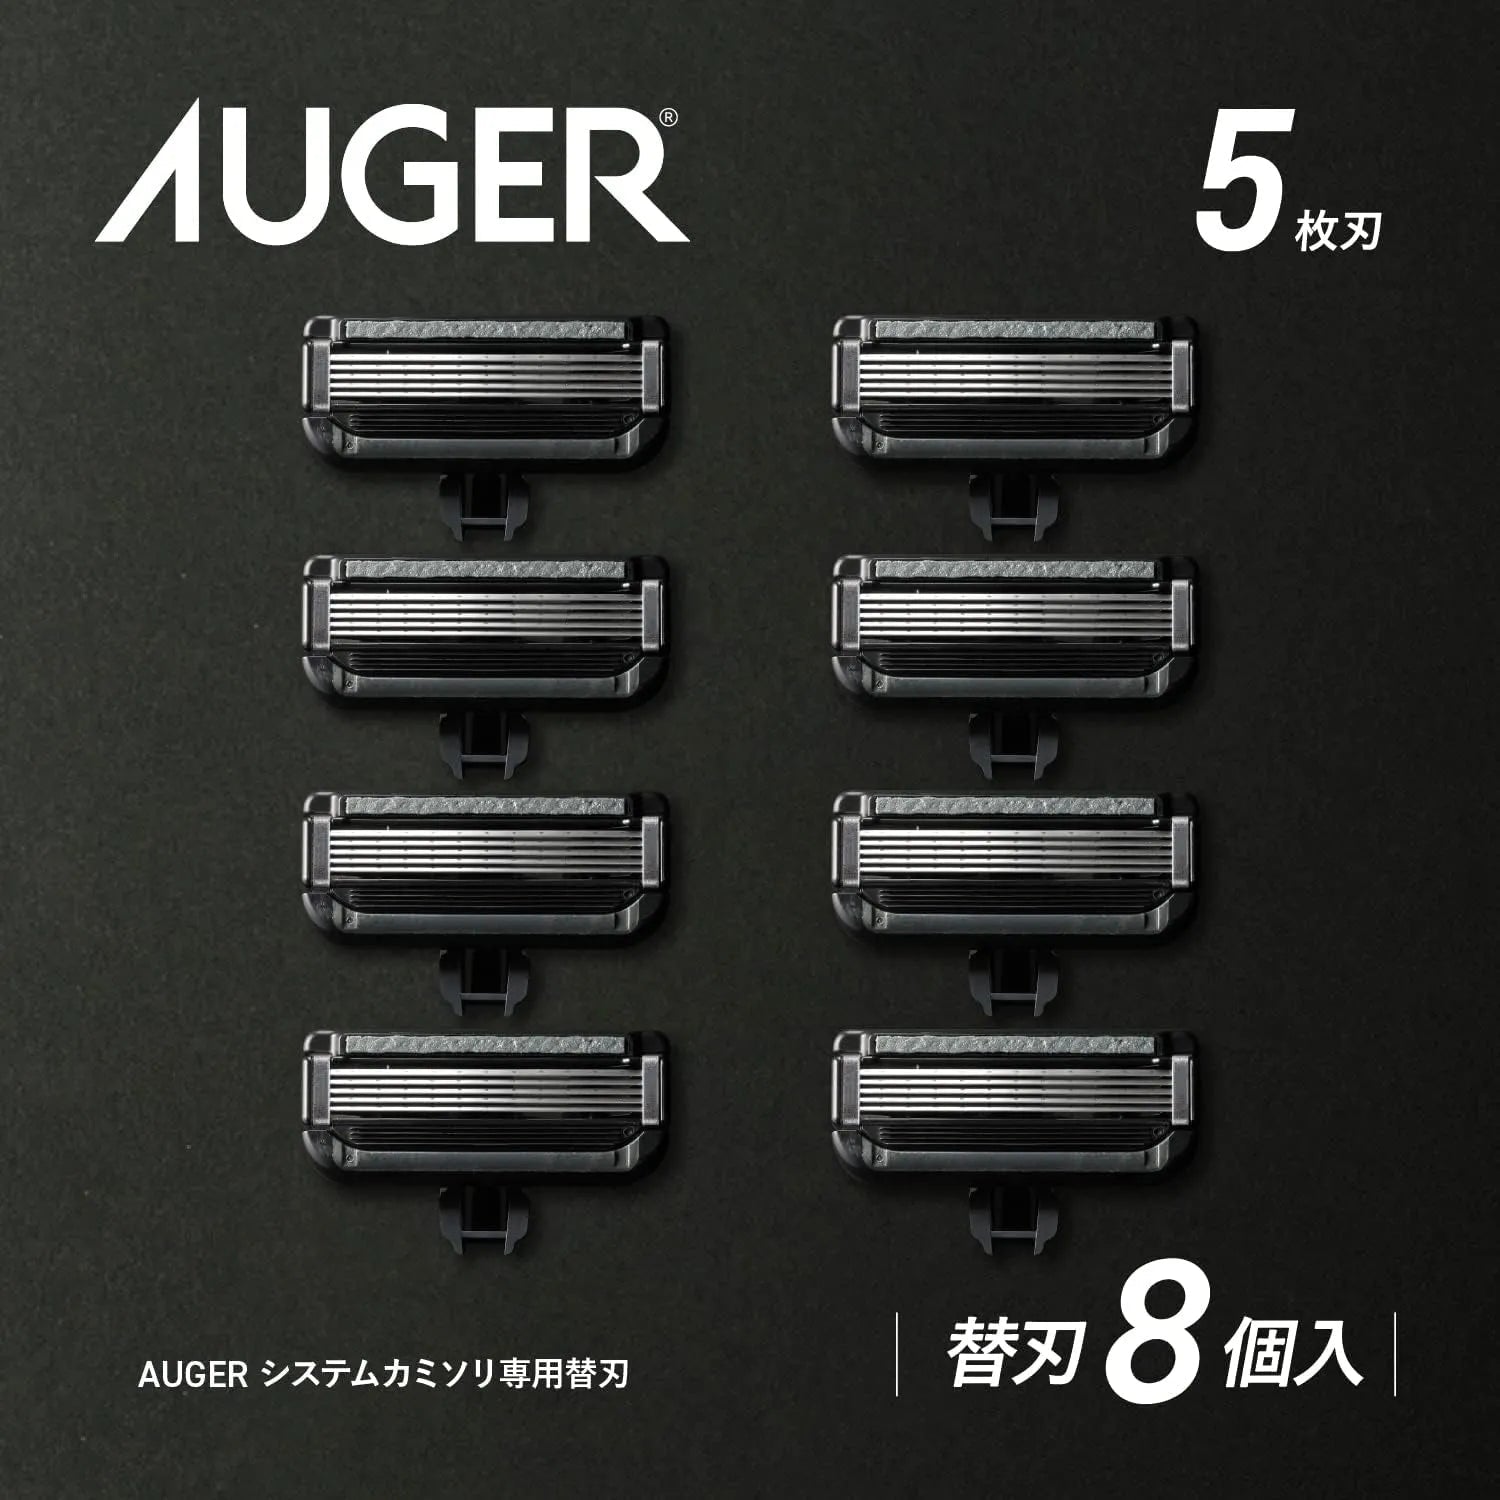 KAI Auger 5-Blade Replacement Blades (Pack Of 8) - Buy Me Japan